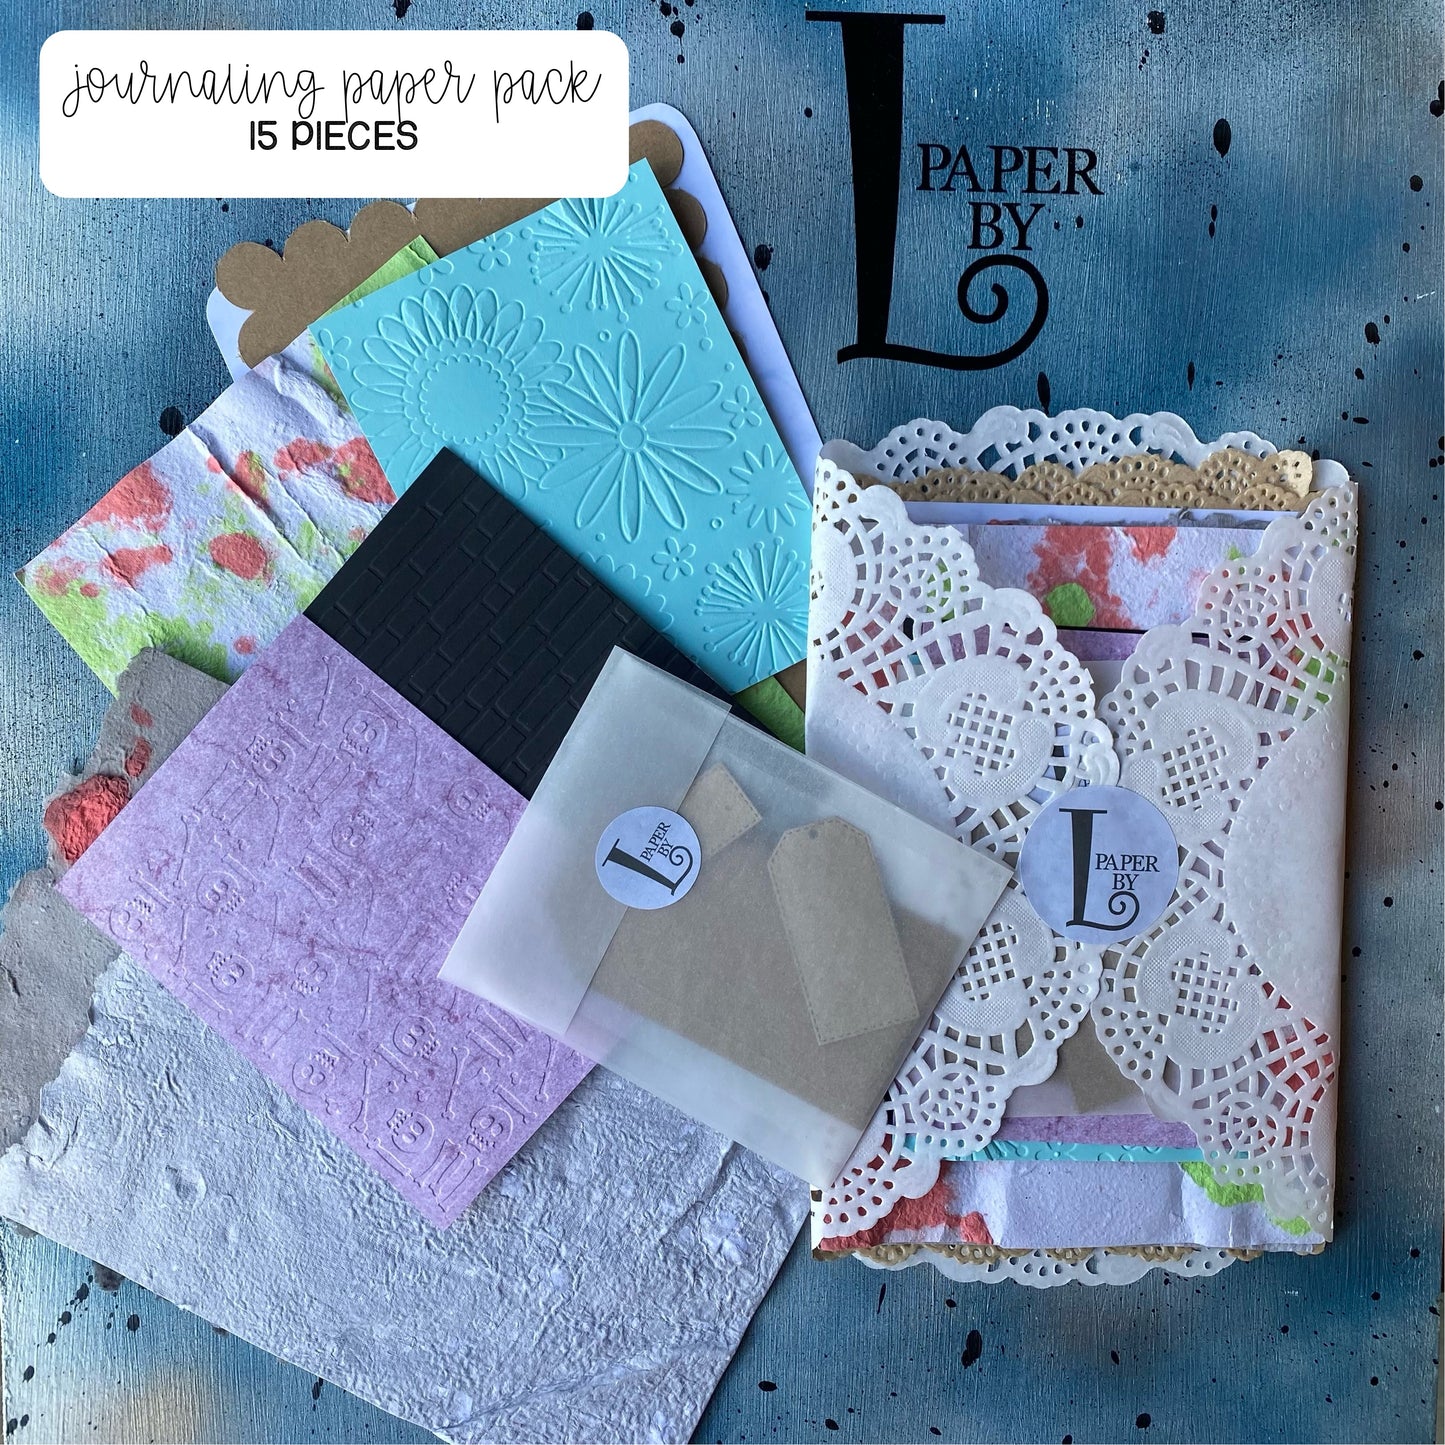 Journaling paper pack - Paper by L